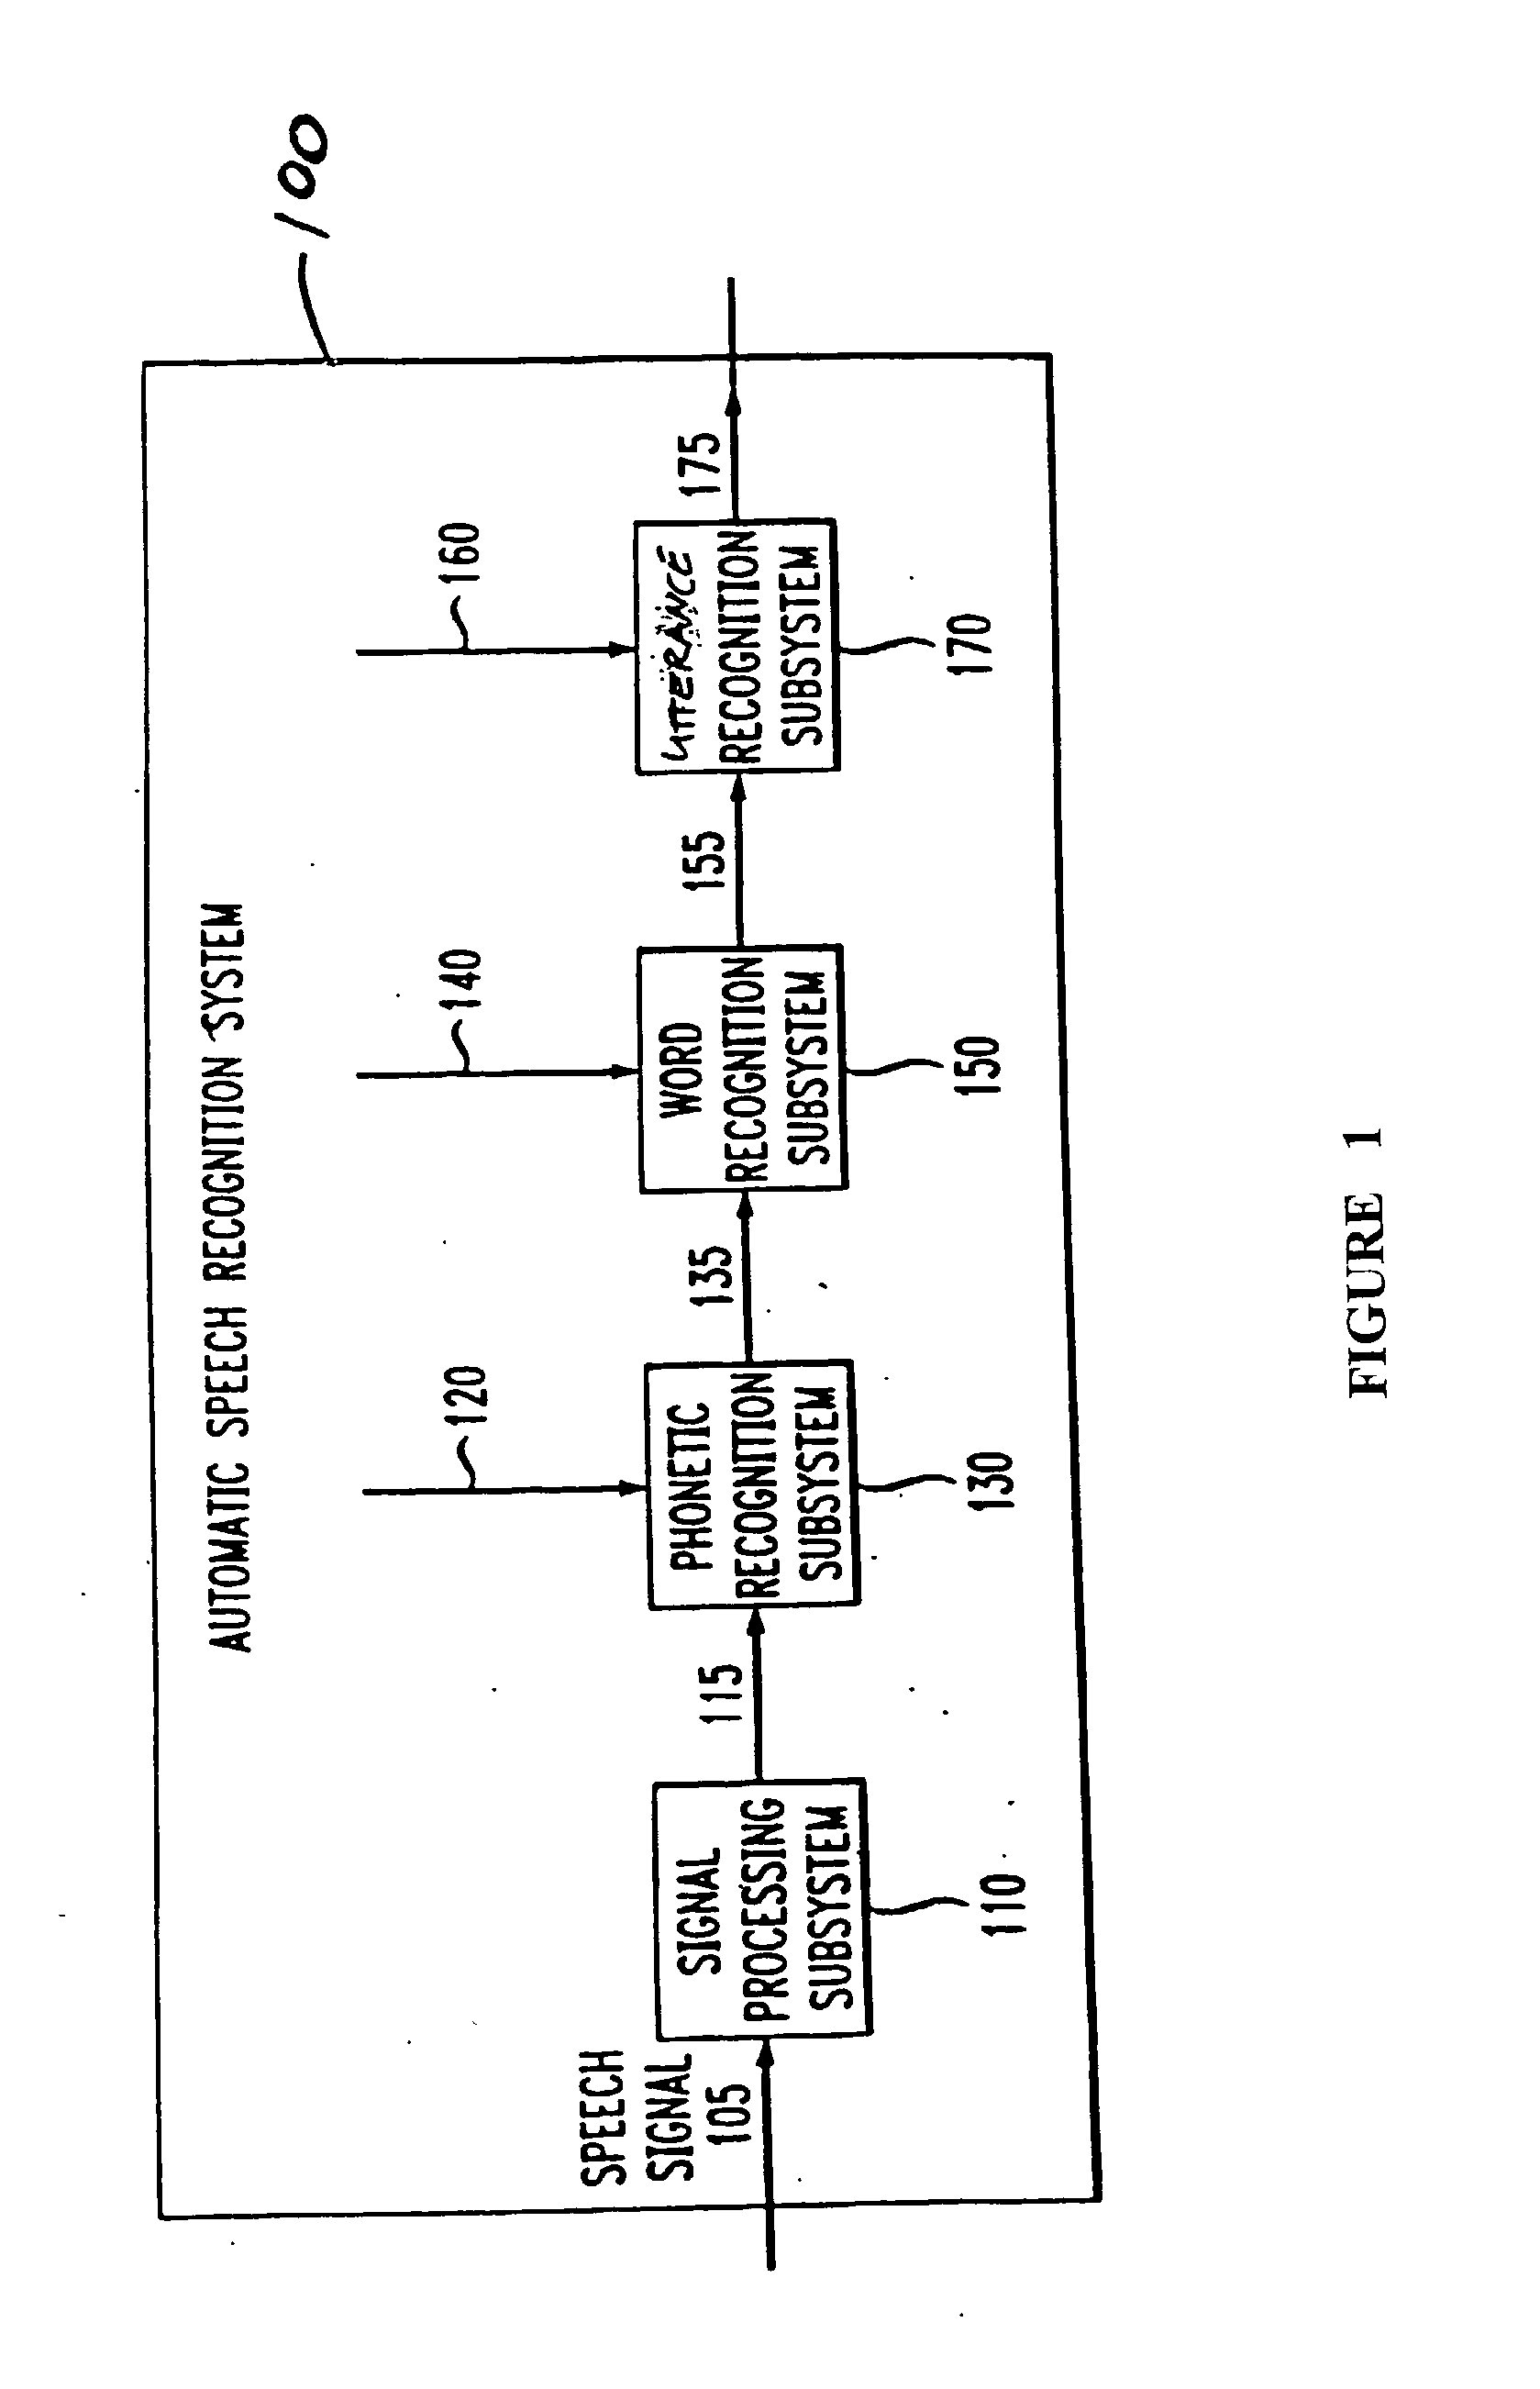 Systems and methods for aggregating related inputs using finite-state devices and extracting meaning from multimodal inputs using aggregation